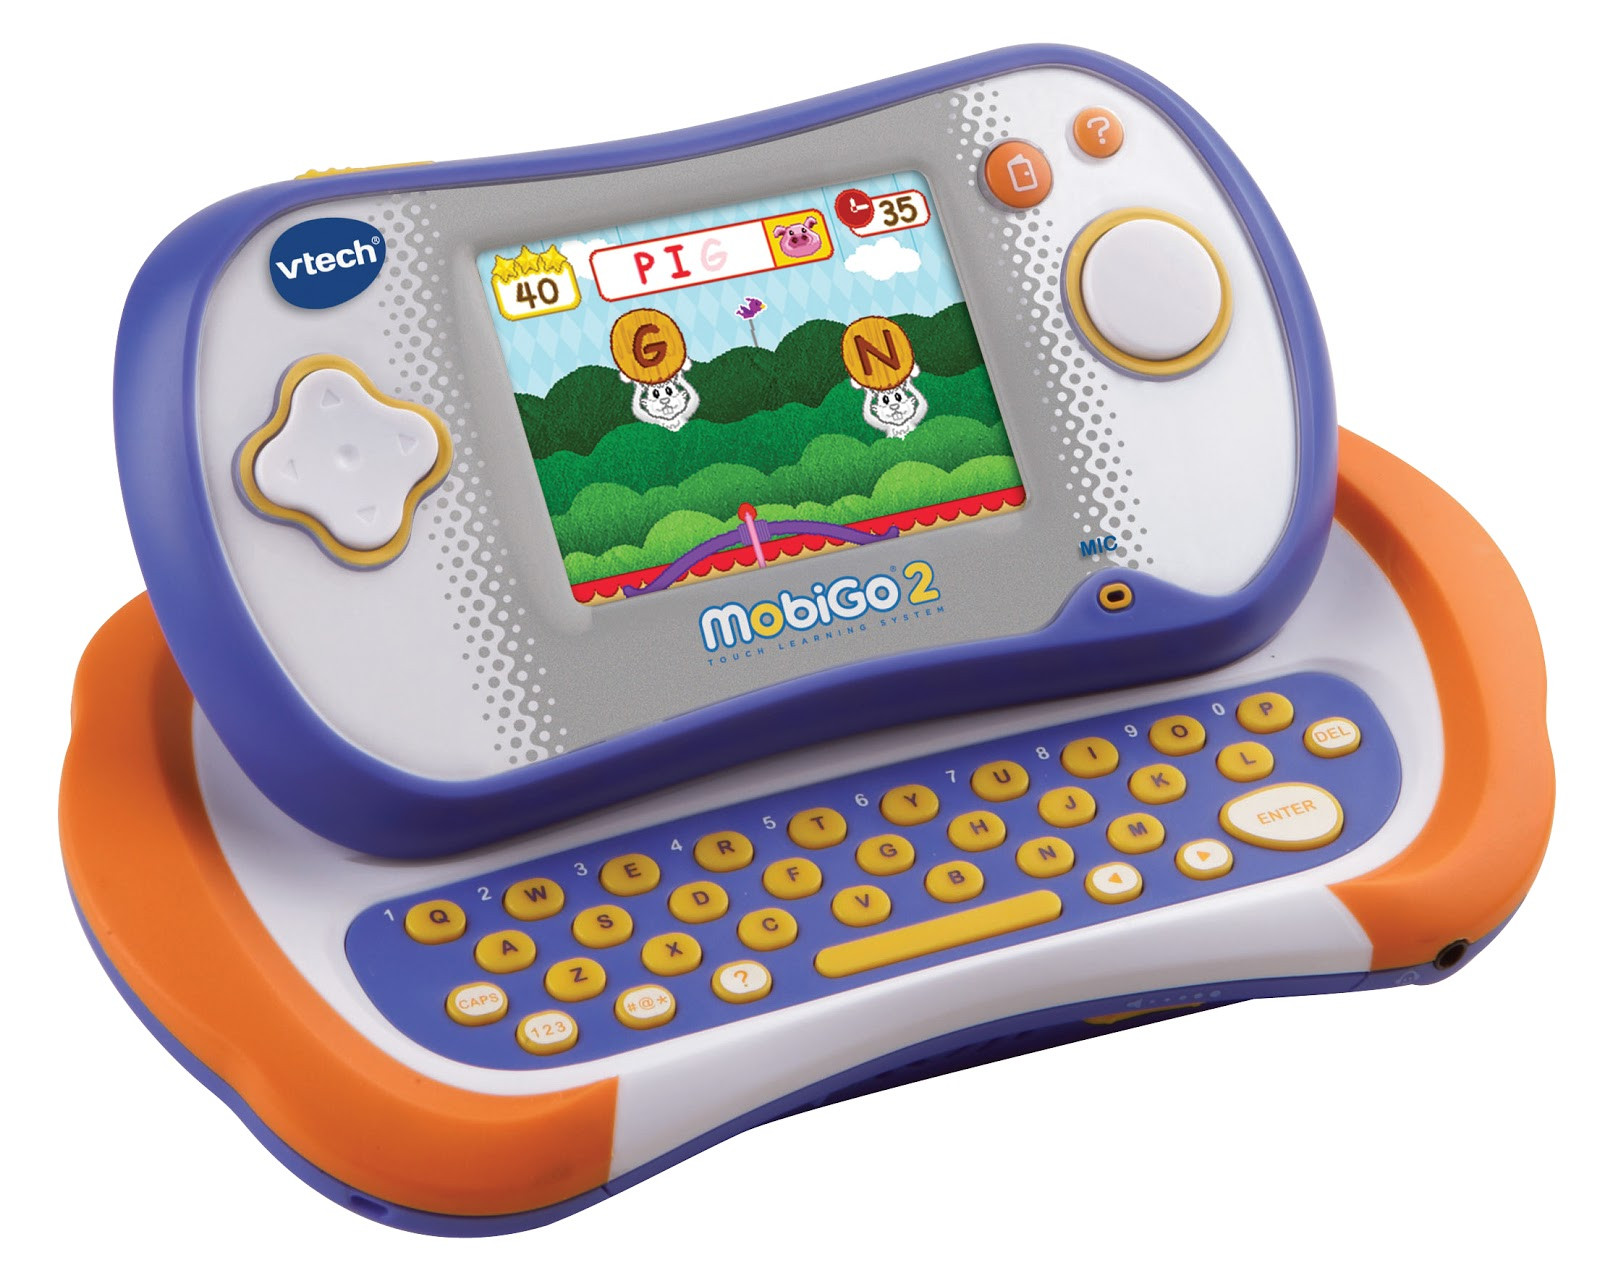 Educational Gifts For Kids
 Top 3 Tech Gift Picks for ages 2 4 & 6